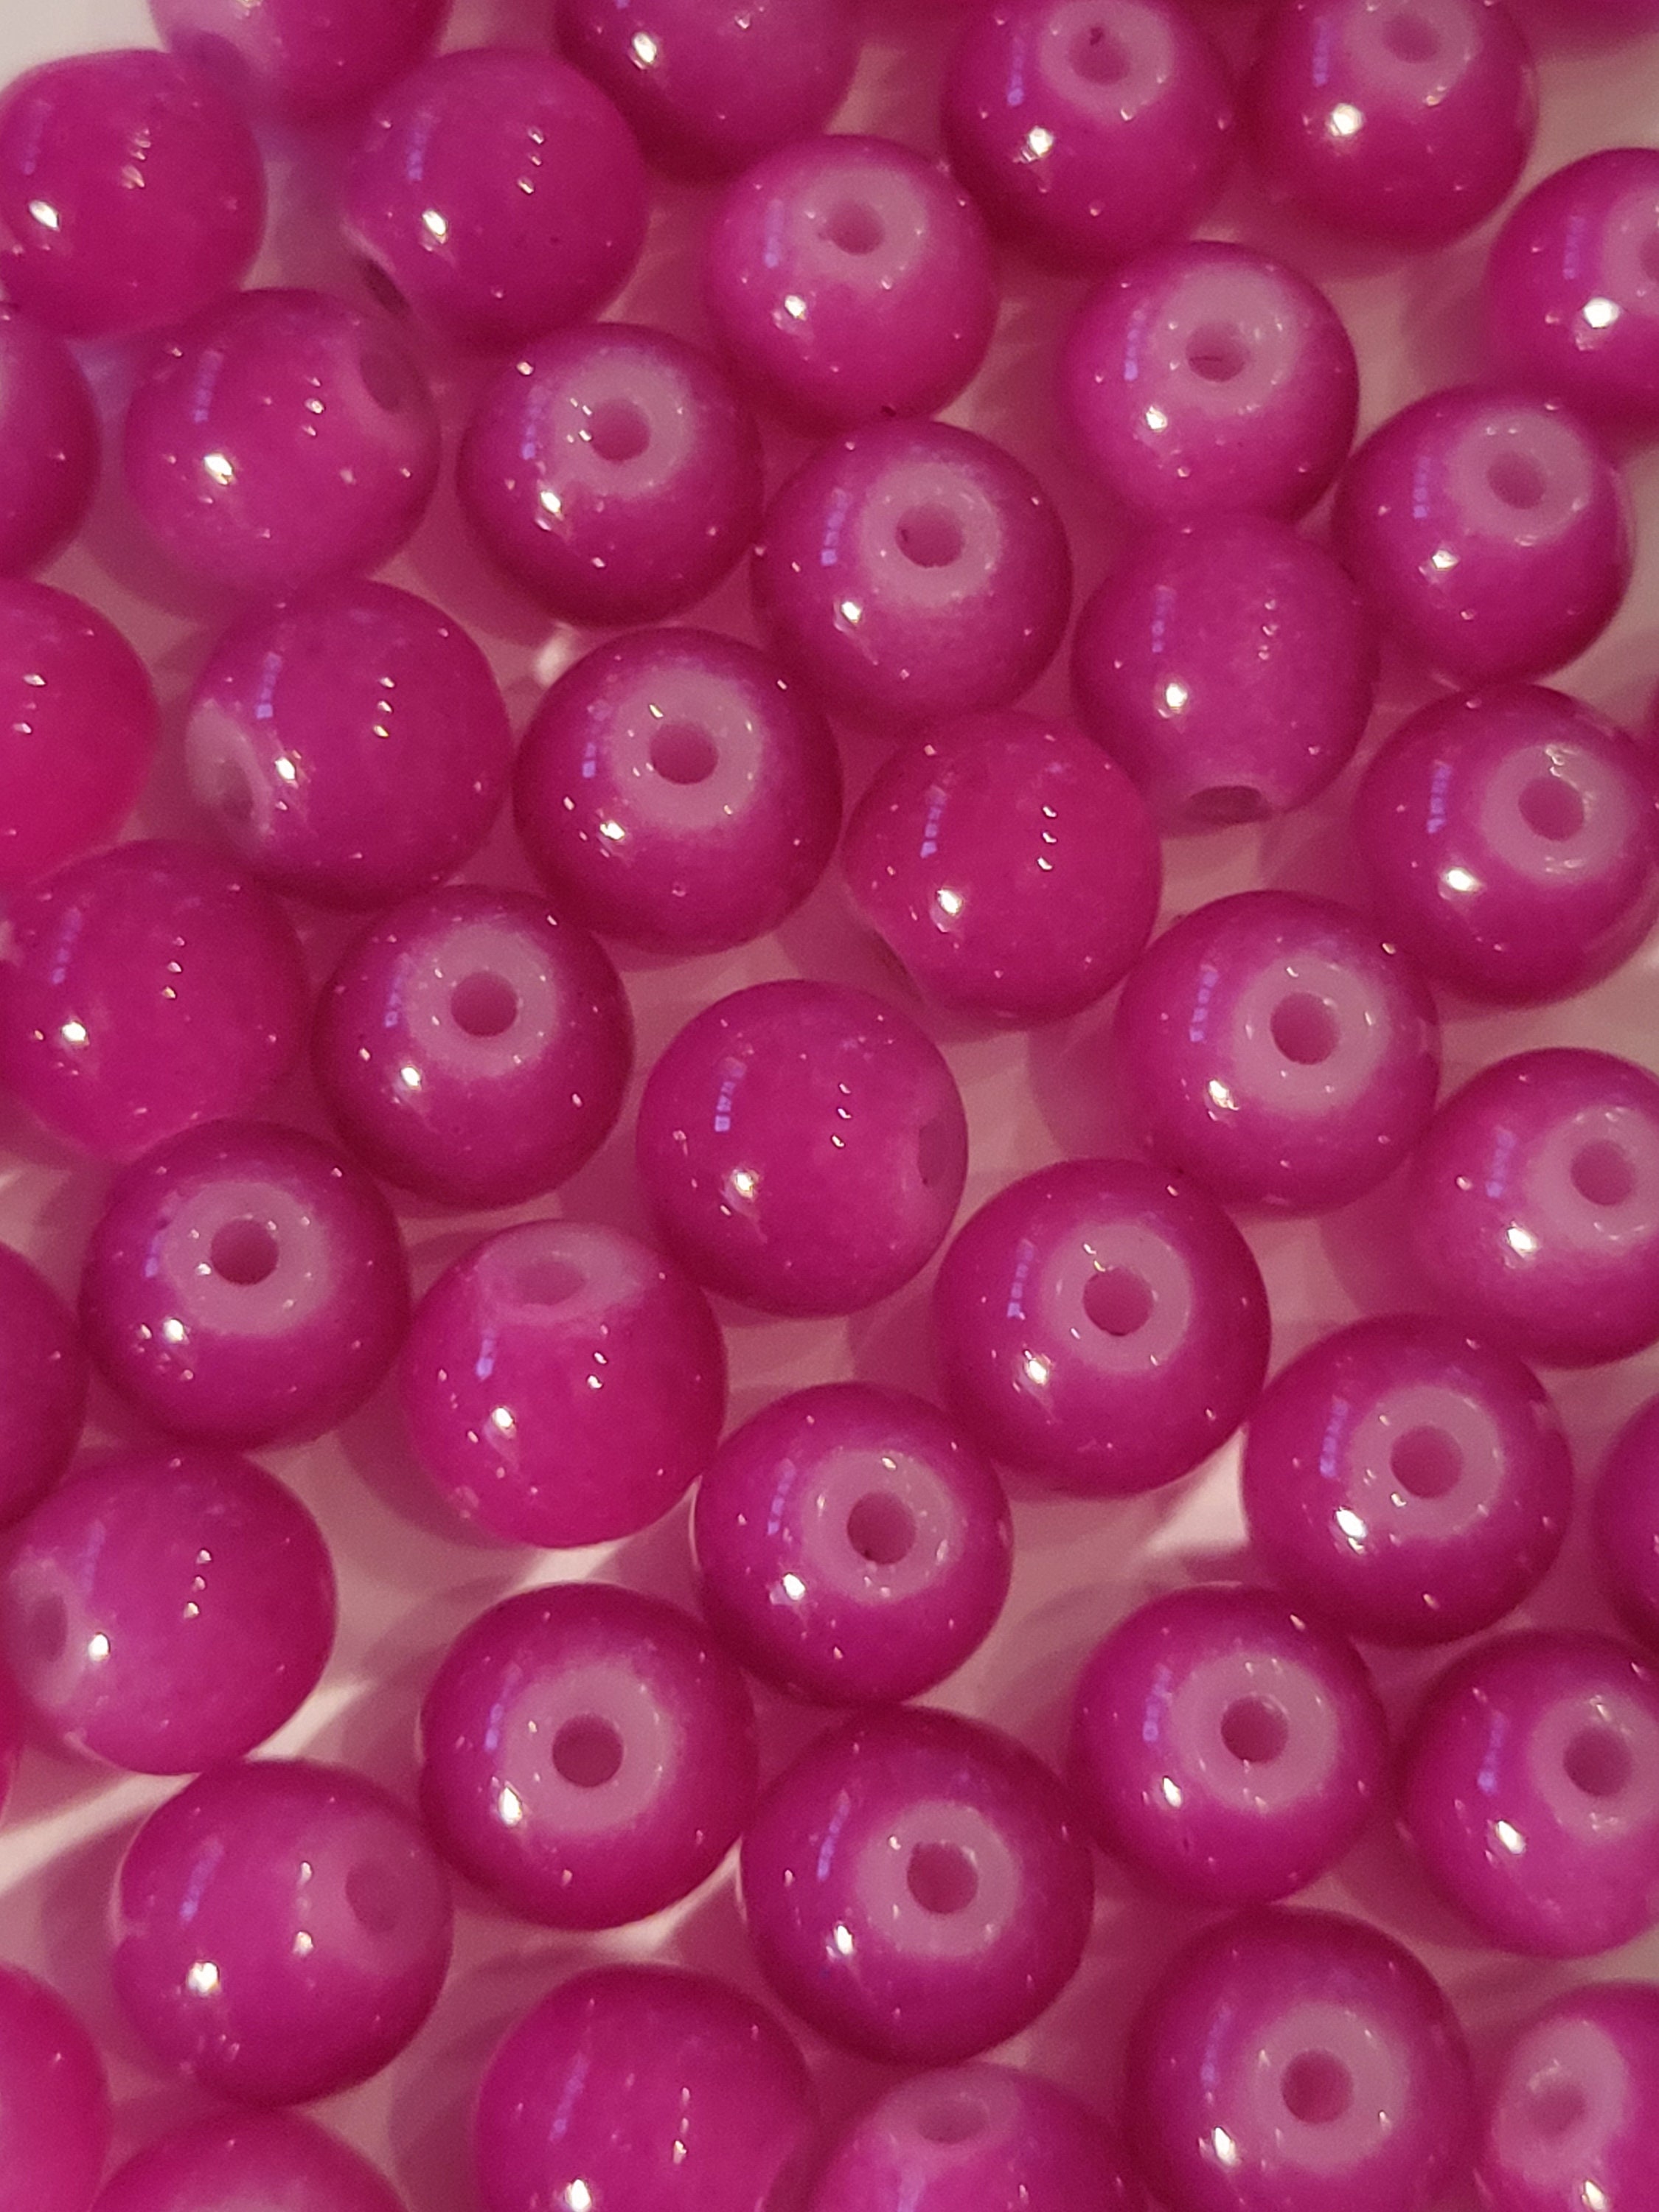 50 Pcs 8mm Textured Glass Pearl Beads moon effect surface KB0737 8mm Pale Pink 